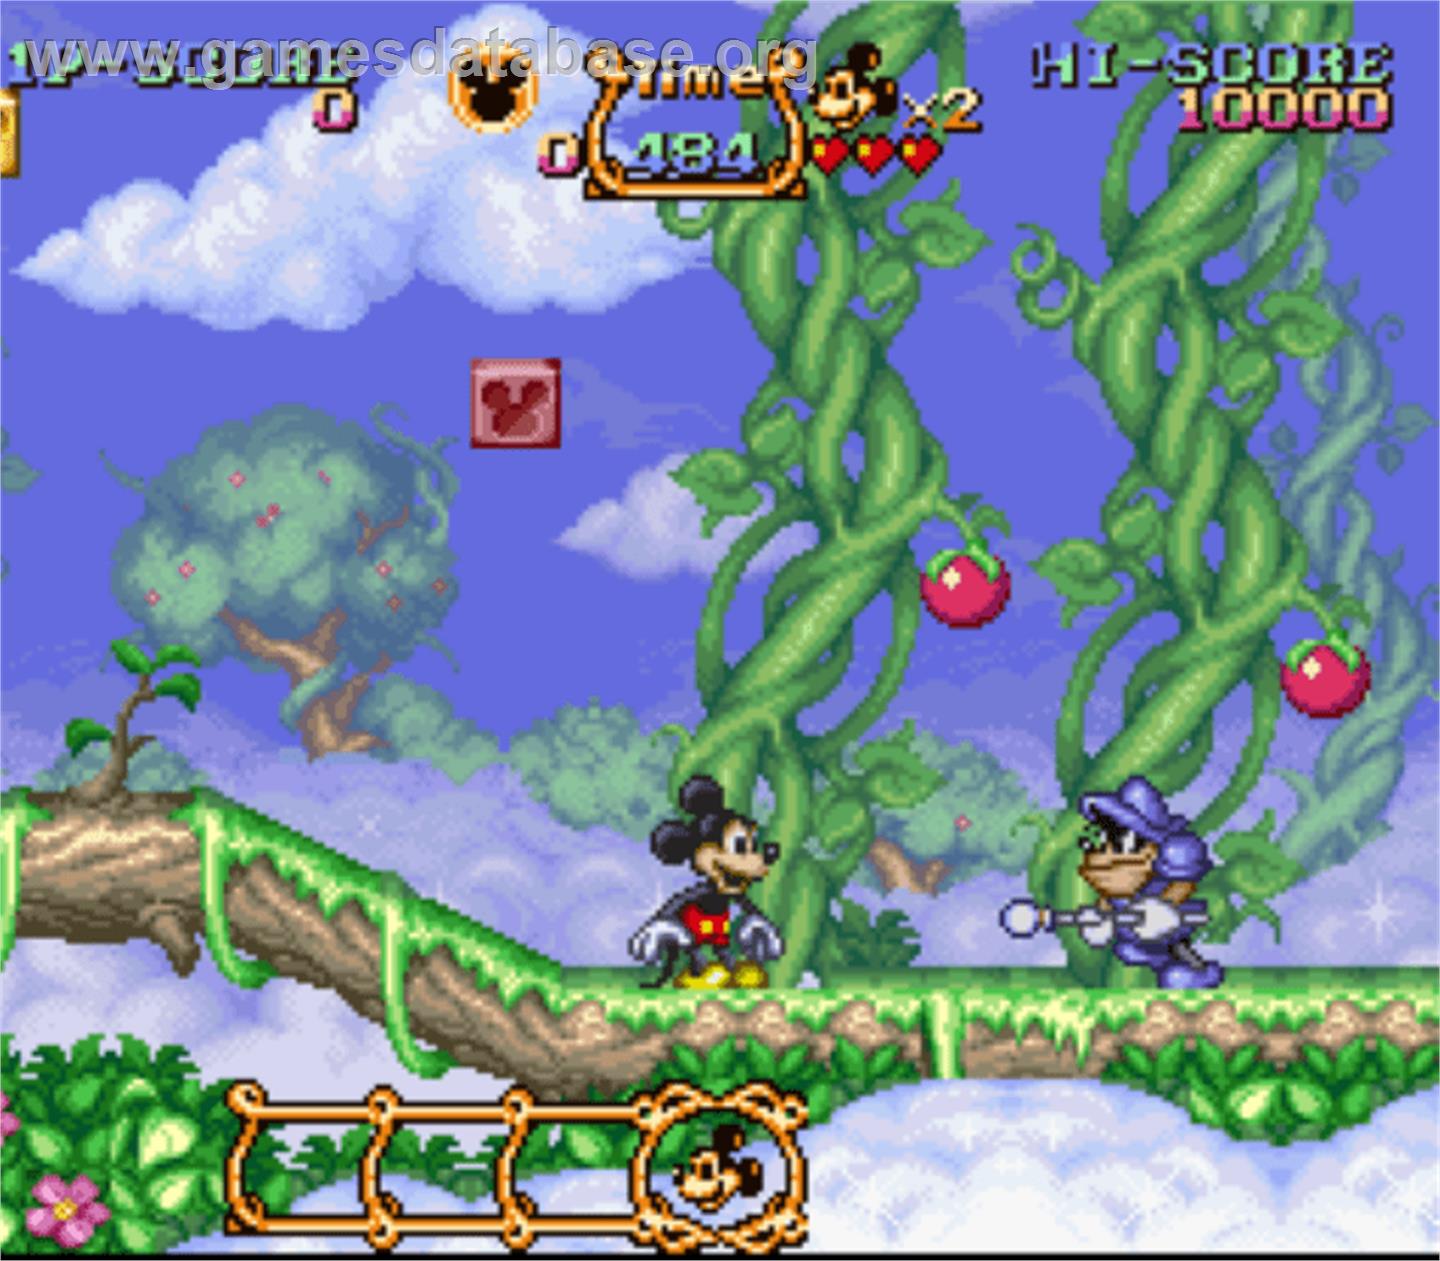 The Magical Quest Starring Mickey Mouse - Nintendo SNES - Artwork - In Game